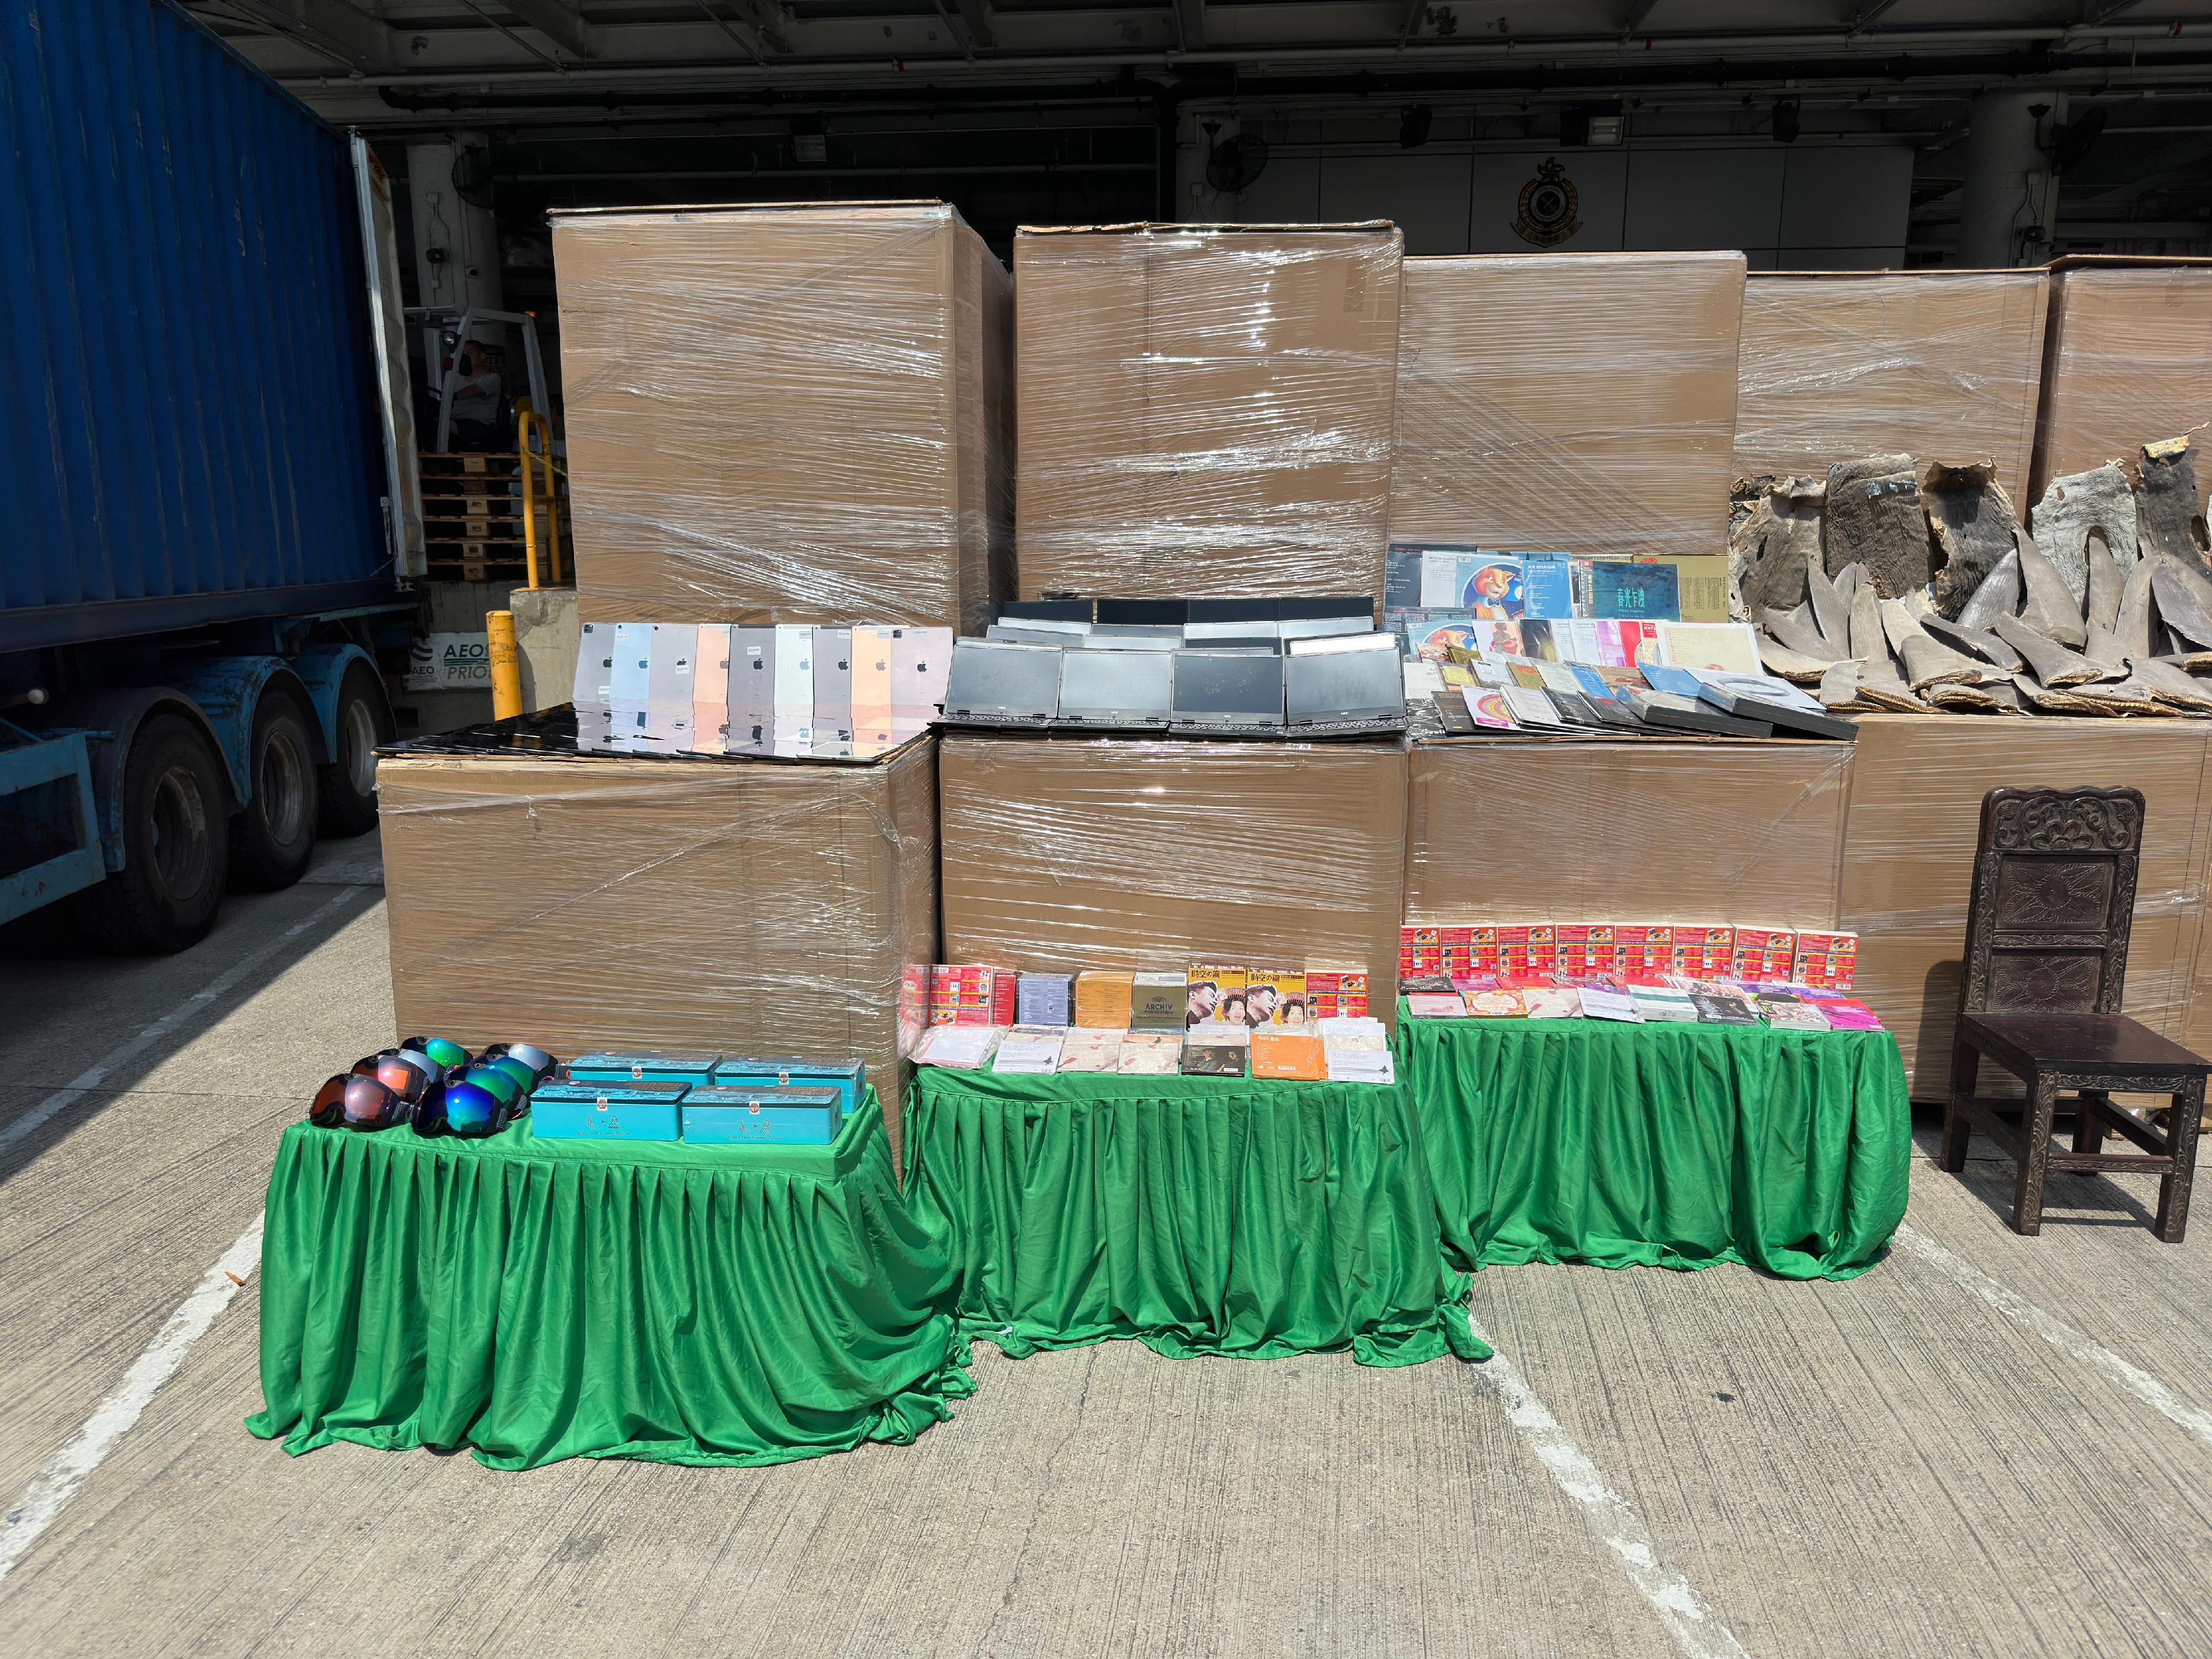 Hong Kong Customs on May 7 detected a suspected case of using an ocean-going vessel to smuggle goods to Taiwan at the Kwai Chung Container Terminals. A large batch of unmanifested goods, including suspected scheduled dried shark fins and skins, suspected scheduled wood furniture, electronic components and electronic products, with an estimated market value of about $160 million was seized inside two containers. Photo shows some of the suspected smuggled electronic products and music records seized.